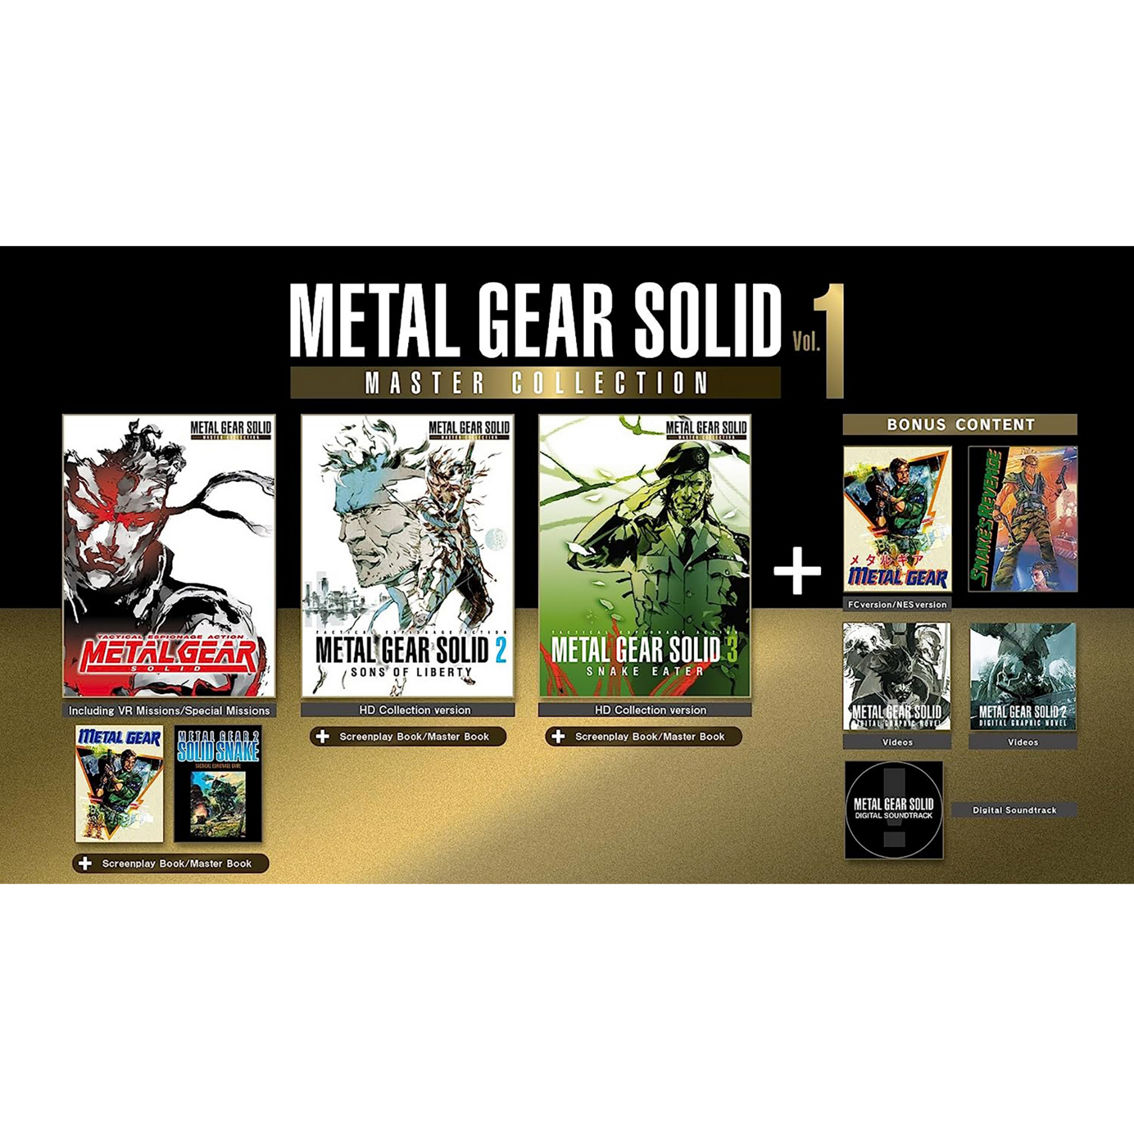 Metal Gear Solid: Master Collection Vol.1 (Nintendo Switch) - Image 6 of 6